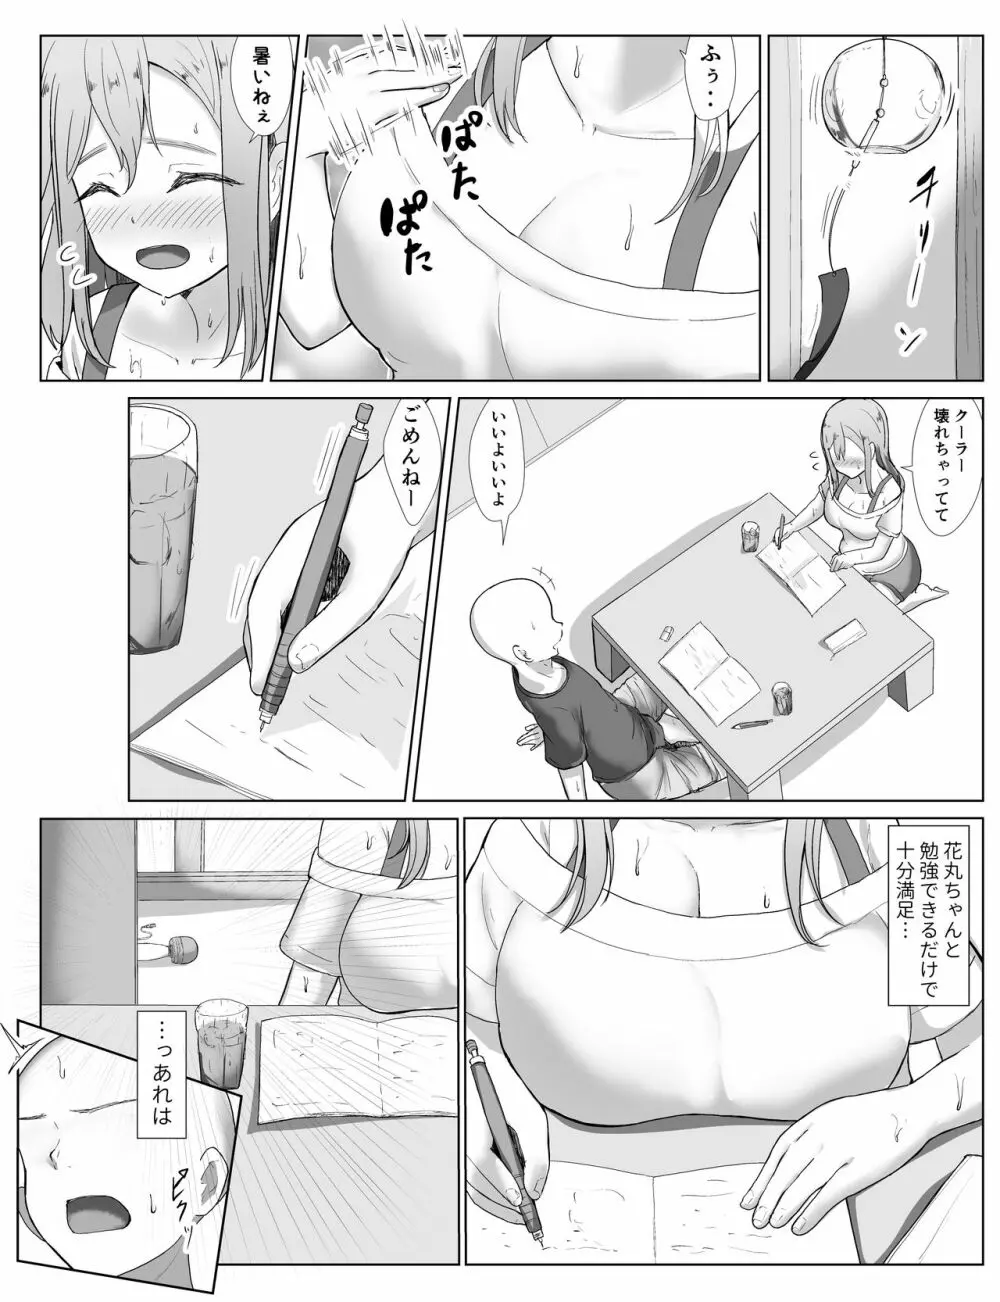 e-rn fanbox short love live doujinshi collection - page31